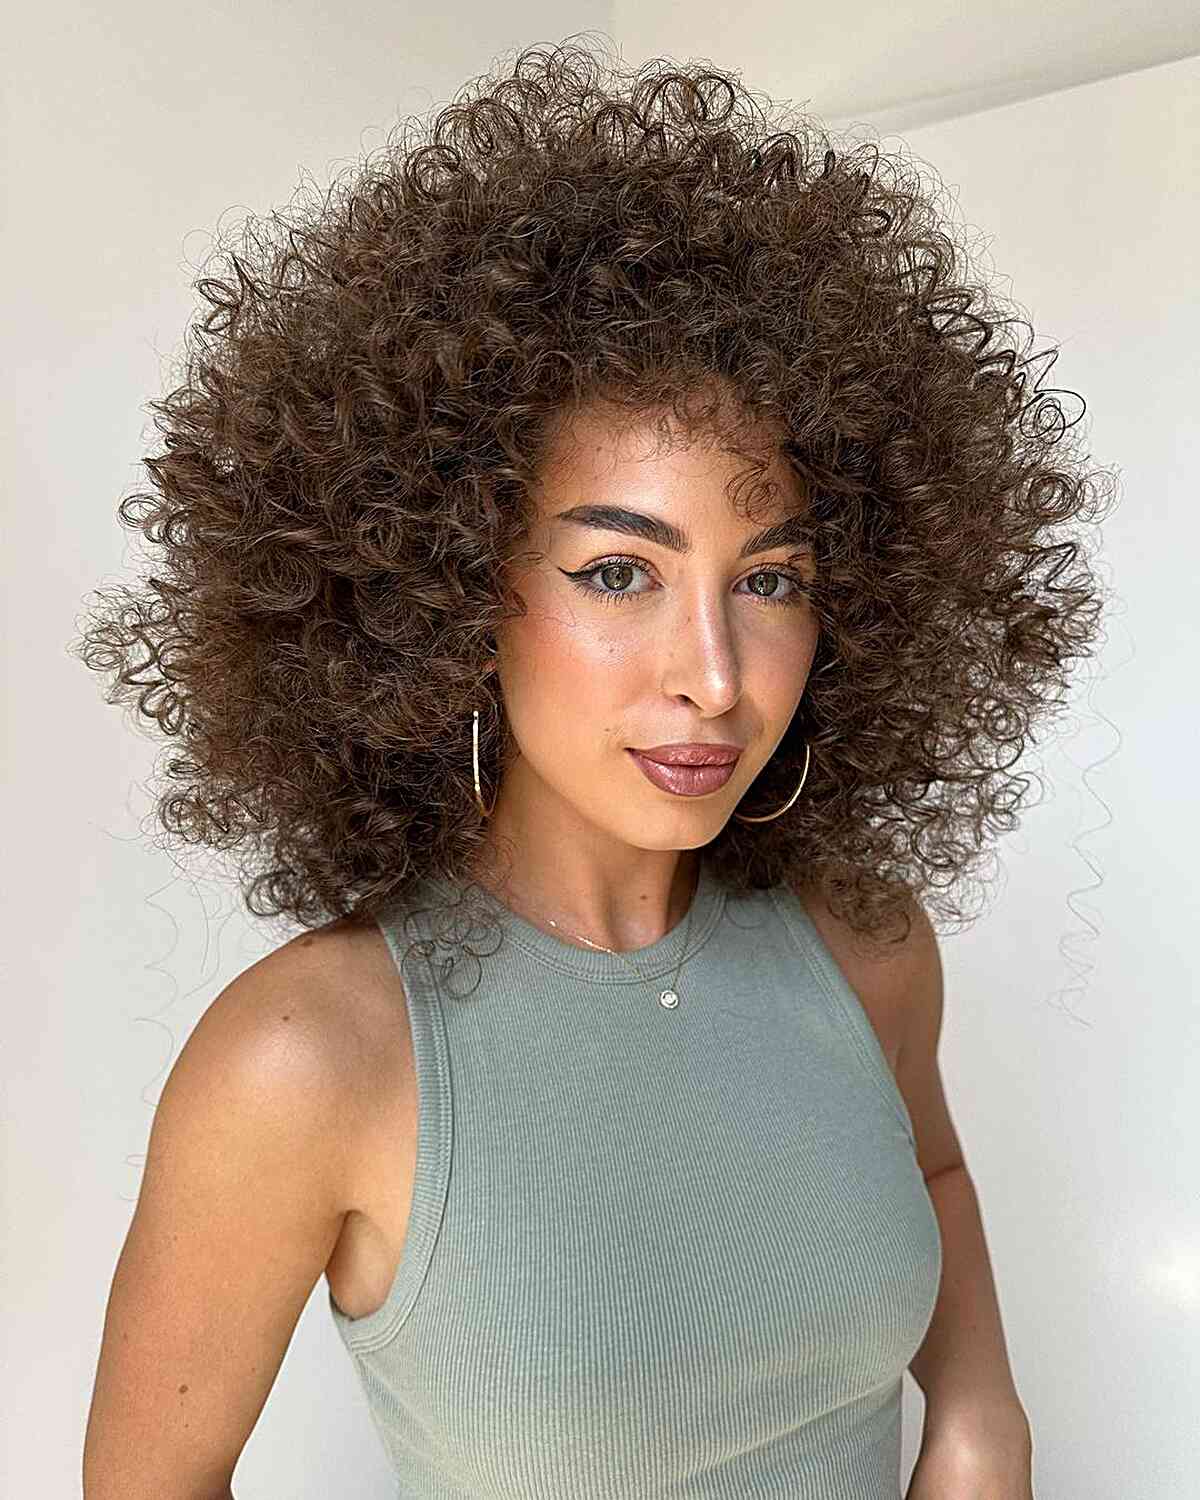 Vintage Curly Afro Disco Hairstyle for Shoulder-Length Hair